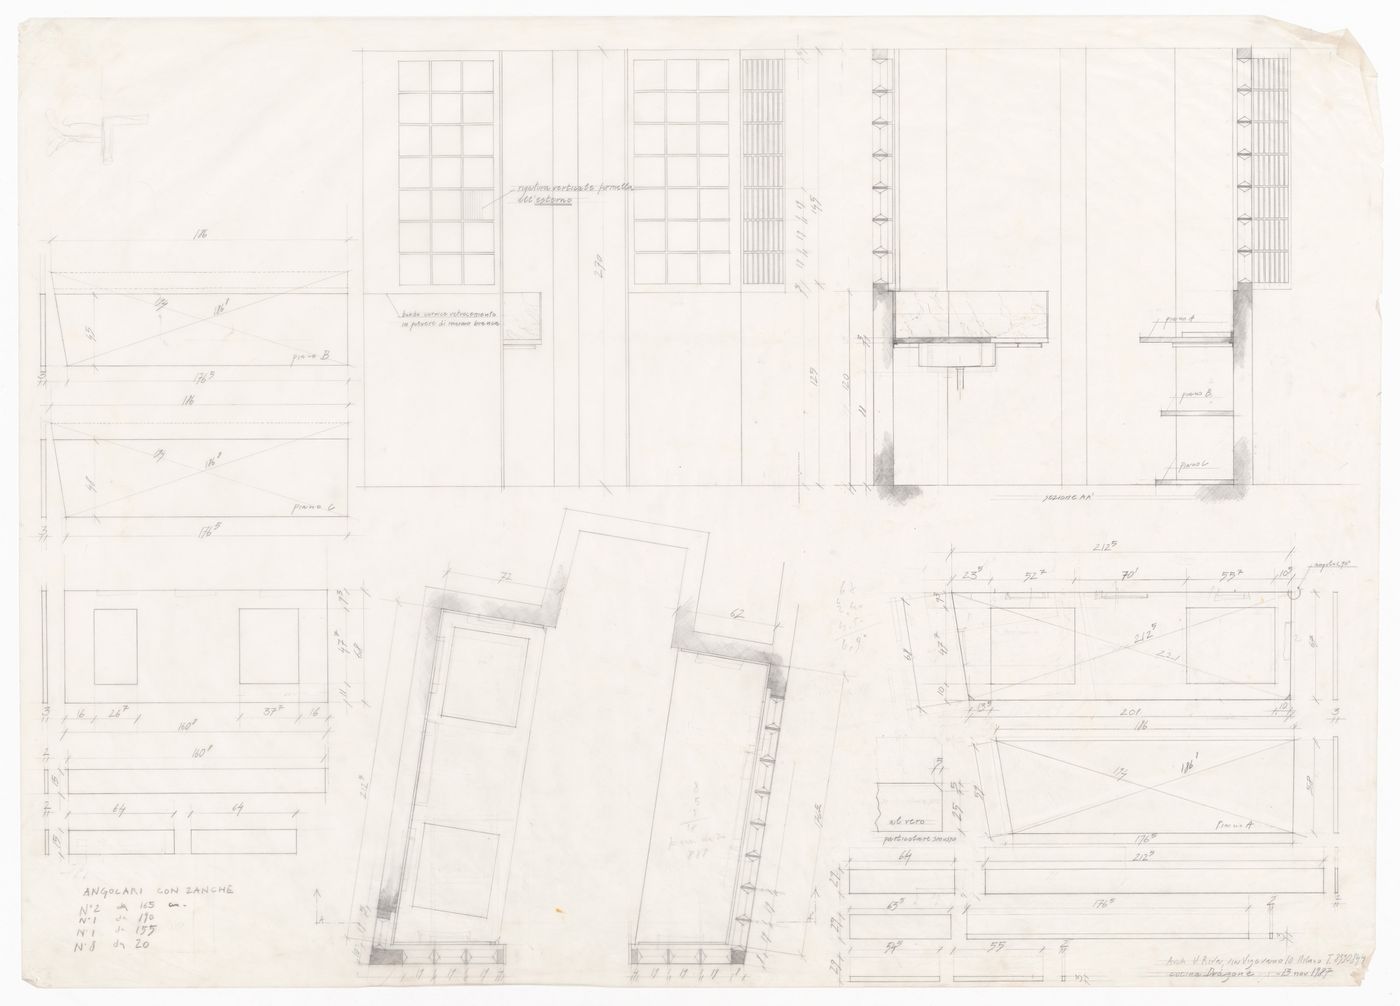 Plans and sections for Casa Dragone e Paggi, Milan, Italy